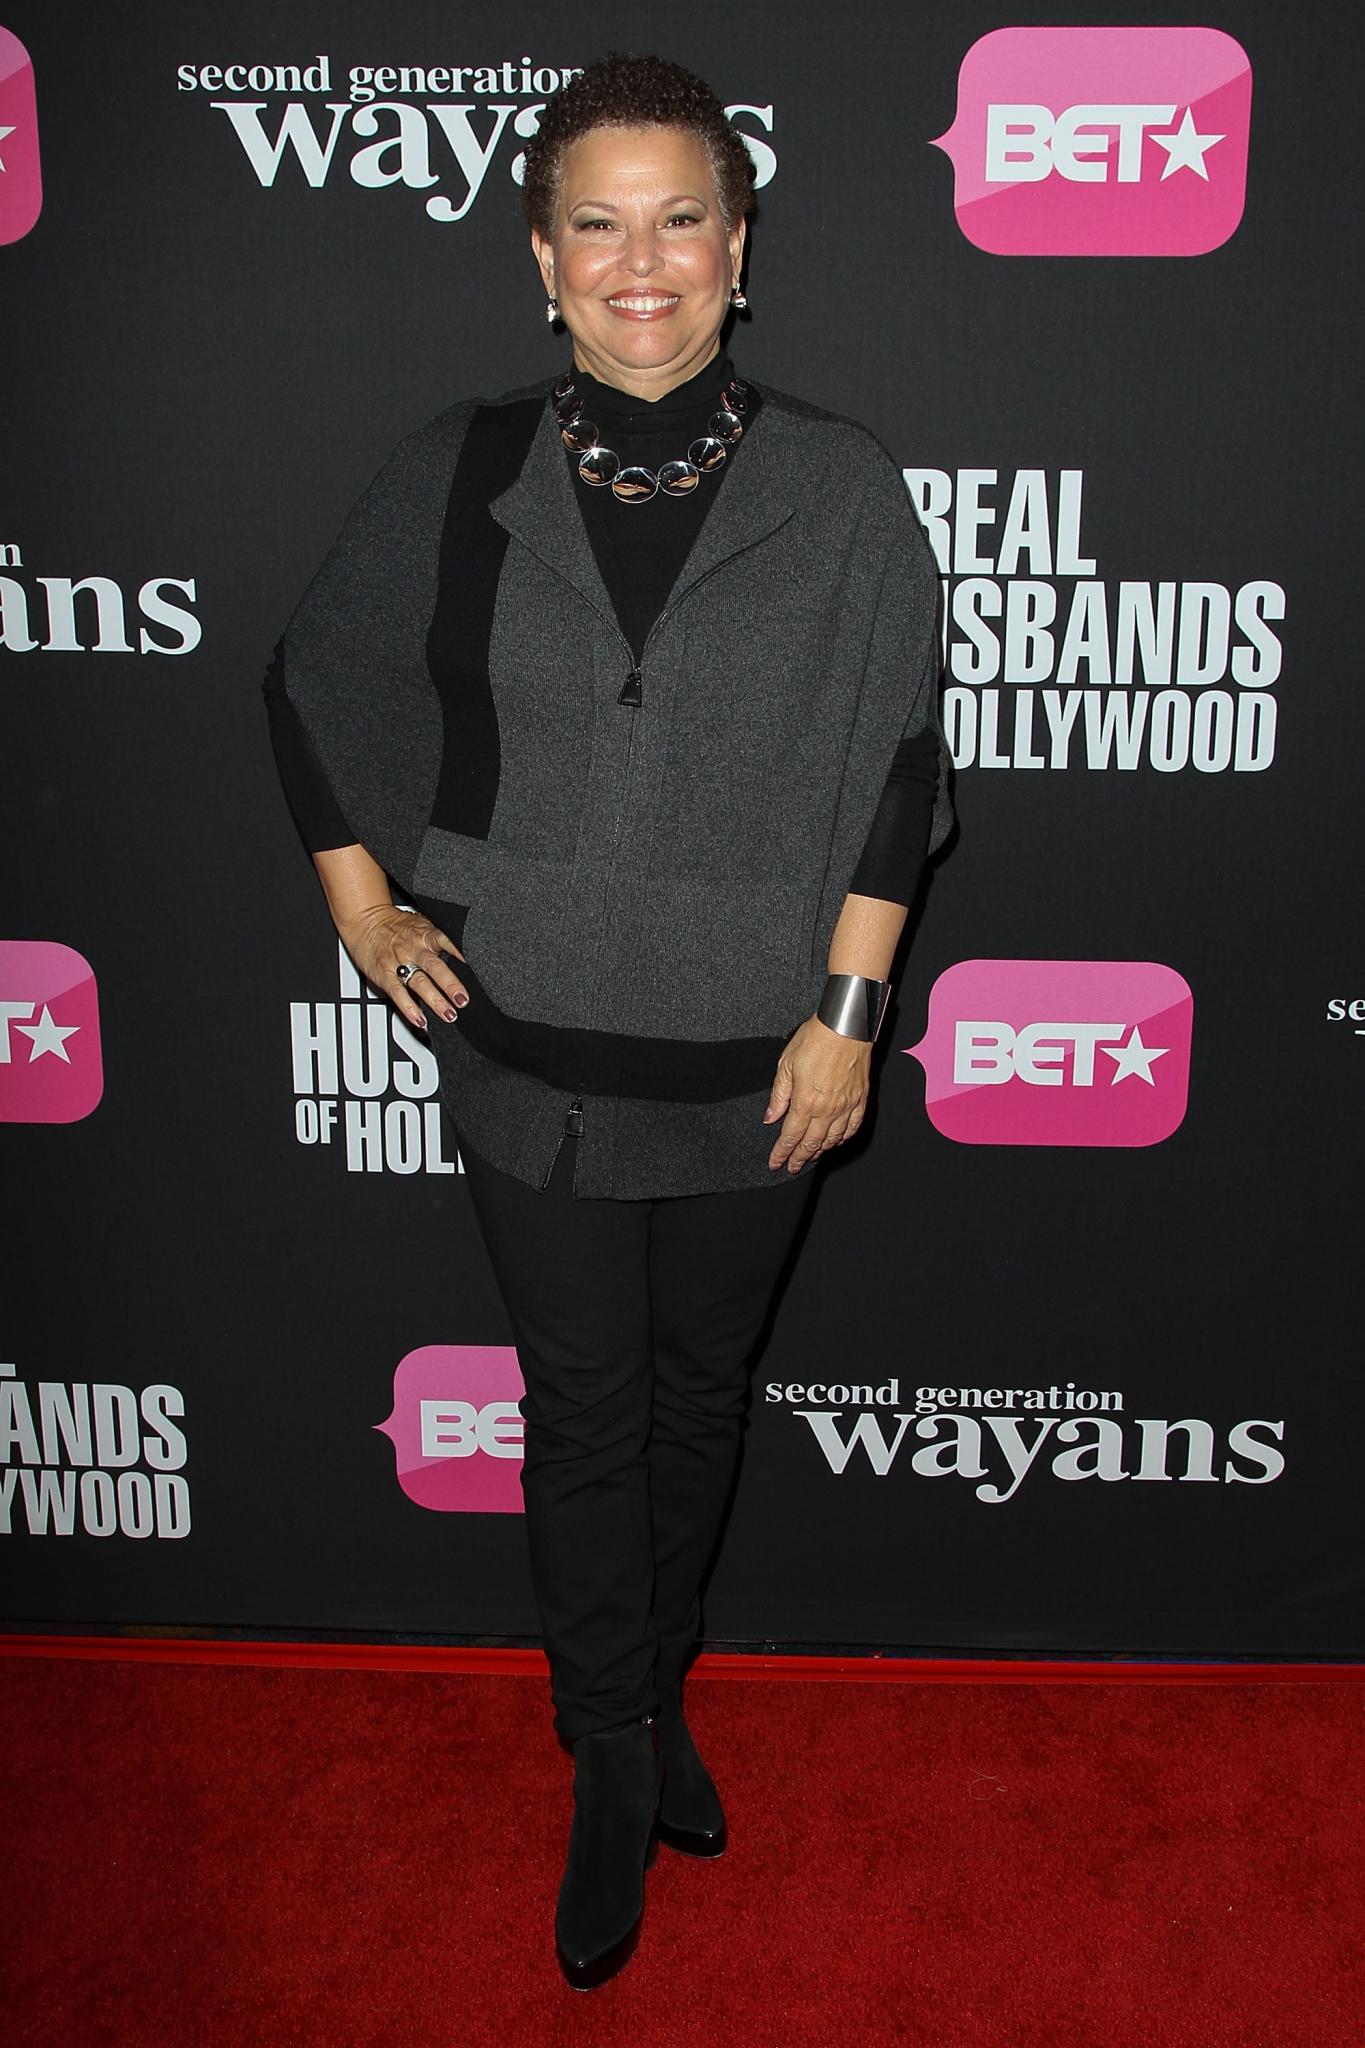 Live from BET's 'Real Husbands of Hollywood' Premiere